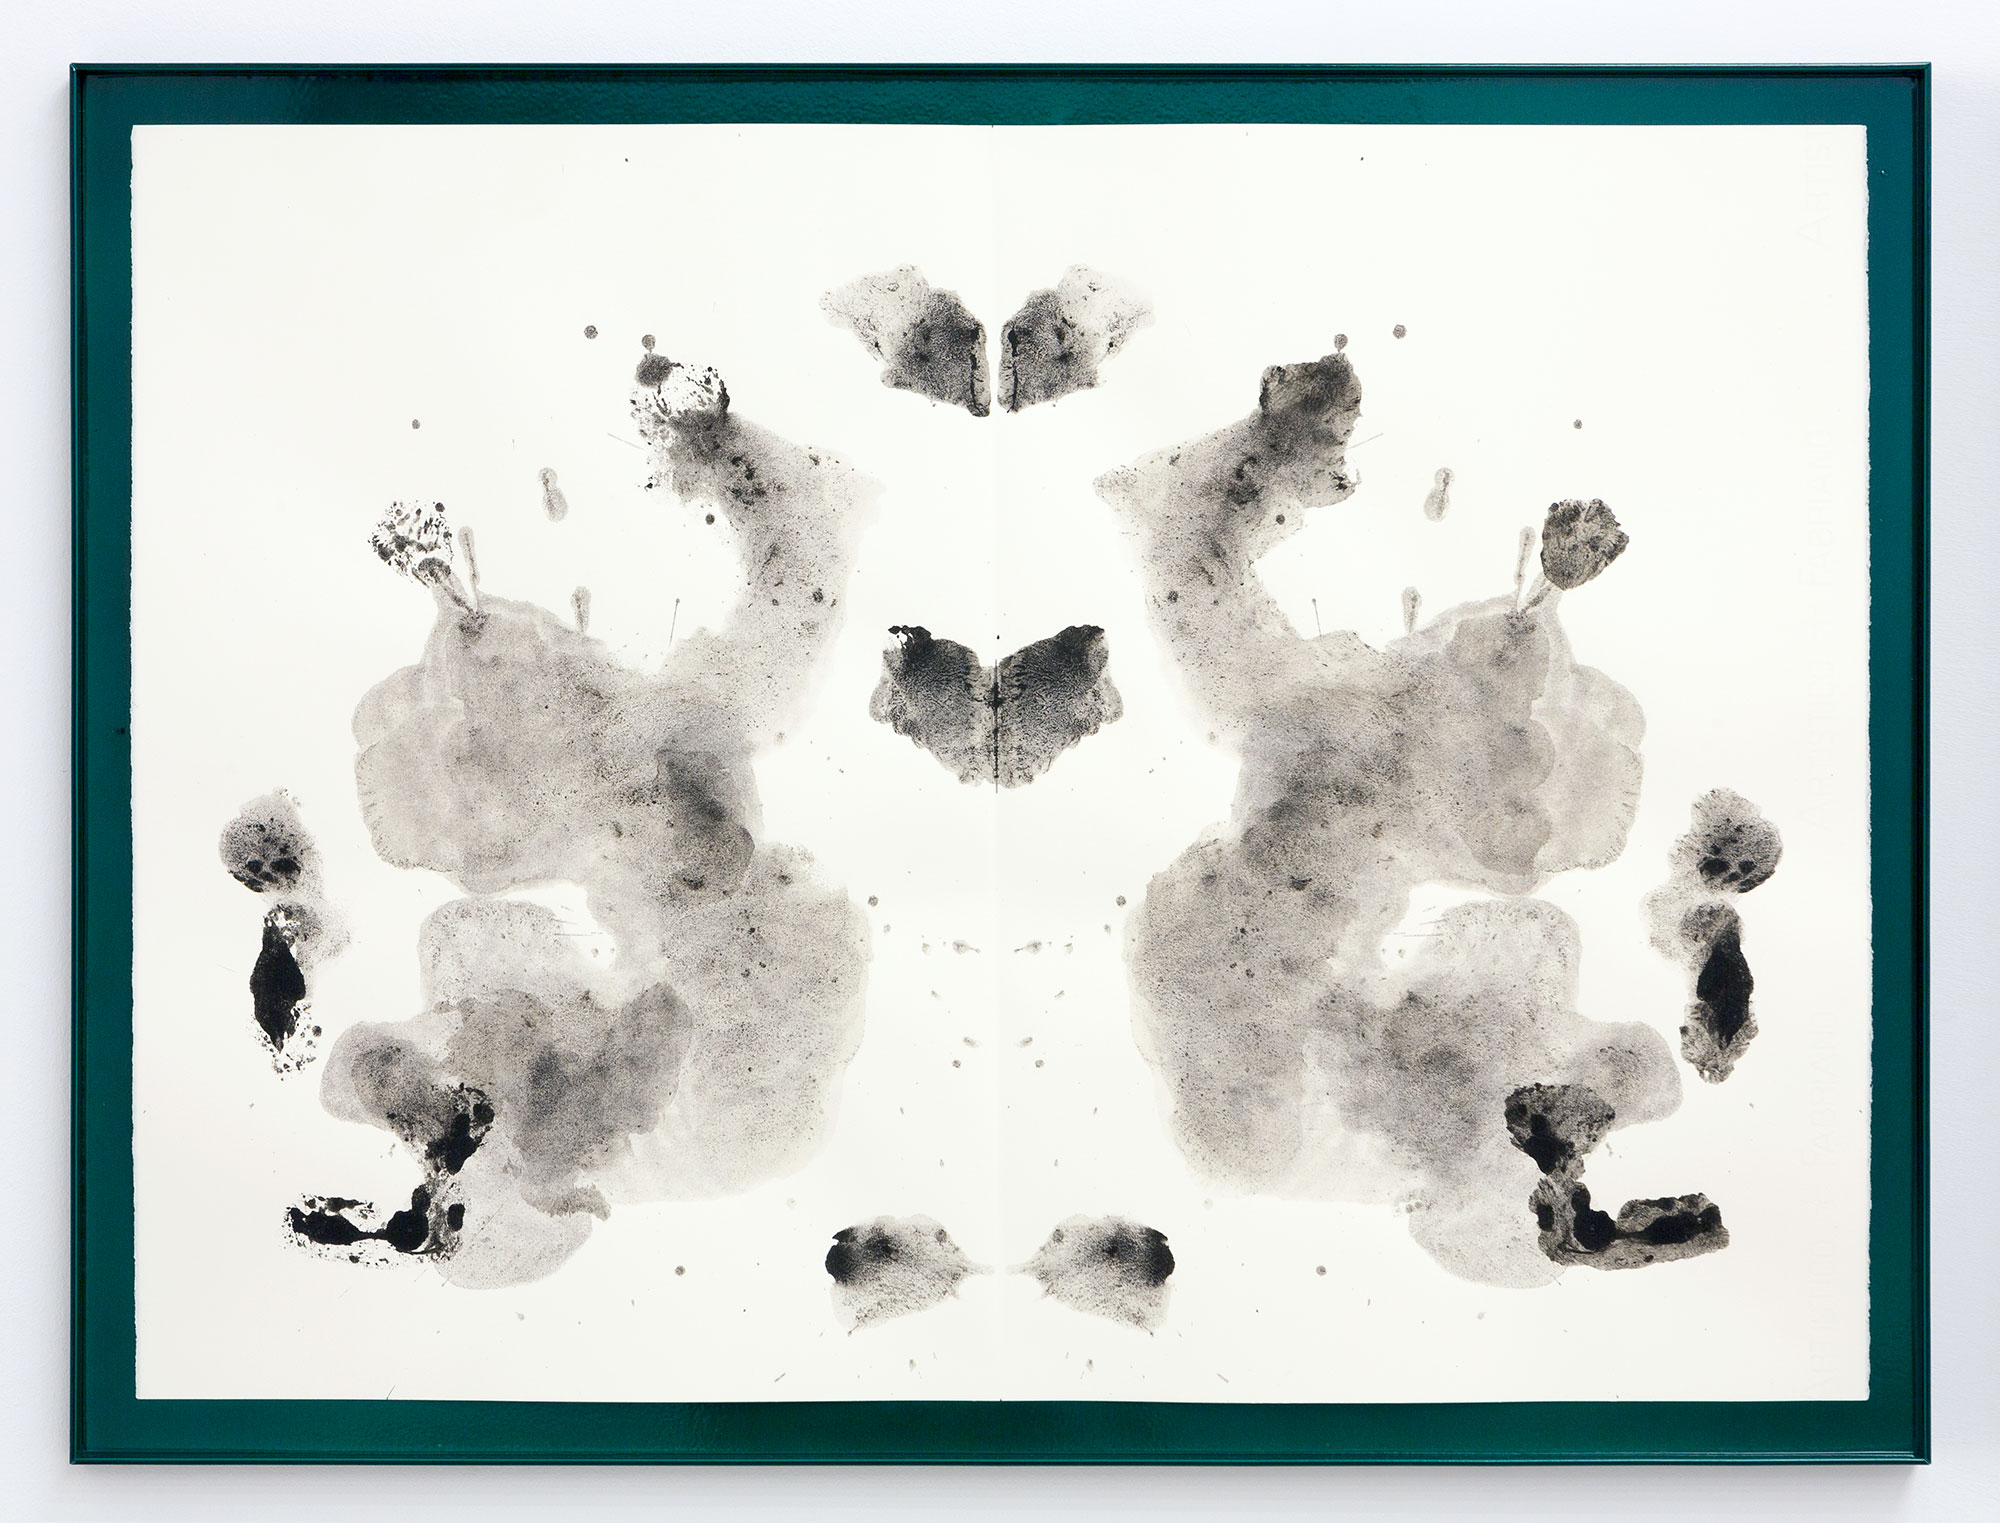 "Waiting Room 1 - Rorschach from cuttlefish ink", 2016, powder coated aluminium, cuttlefish ink on white Fabriano wove paper, 61 × 81 × 2 cm